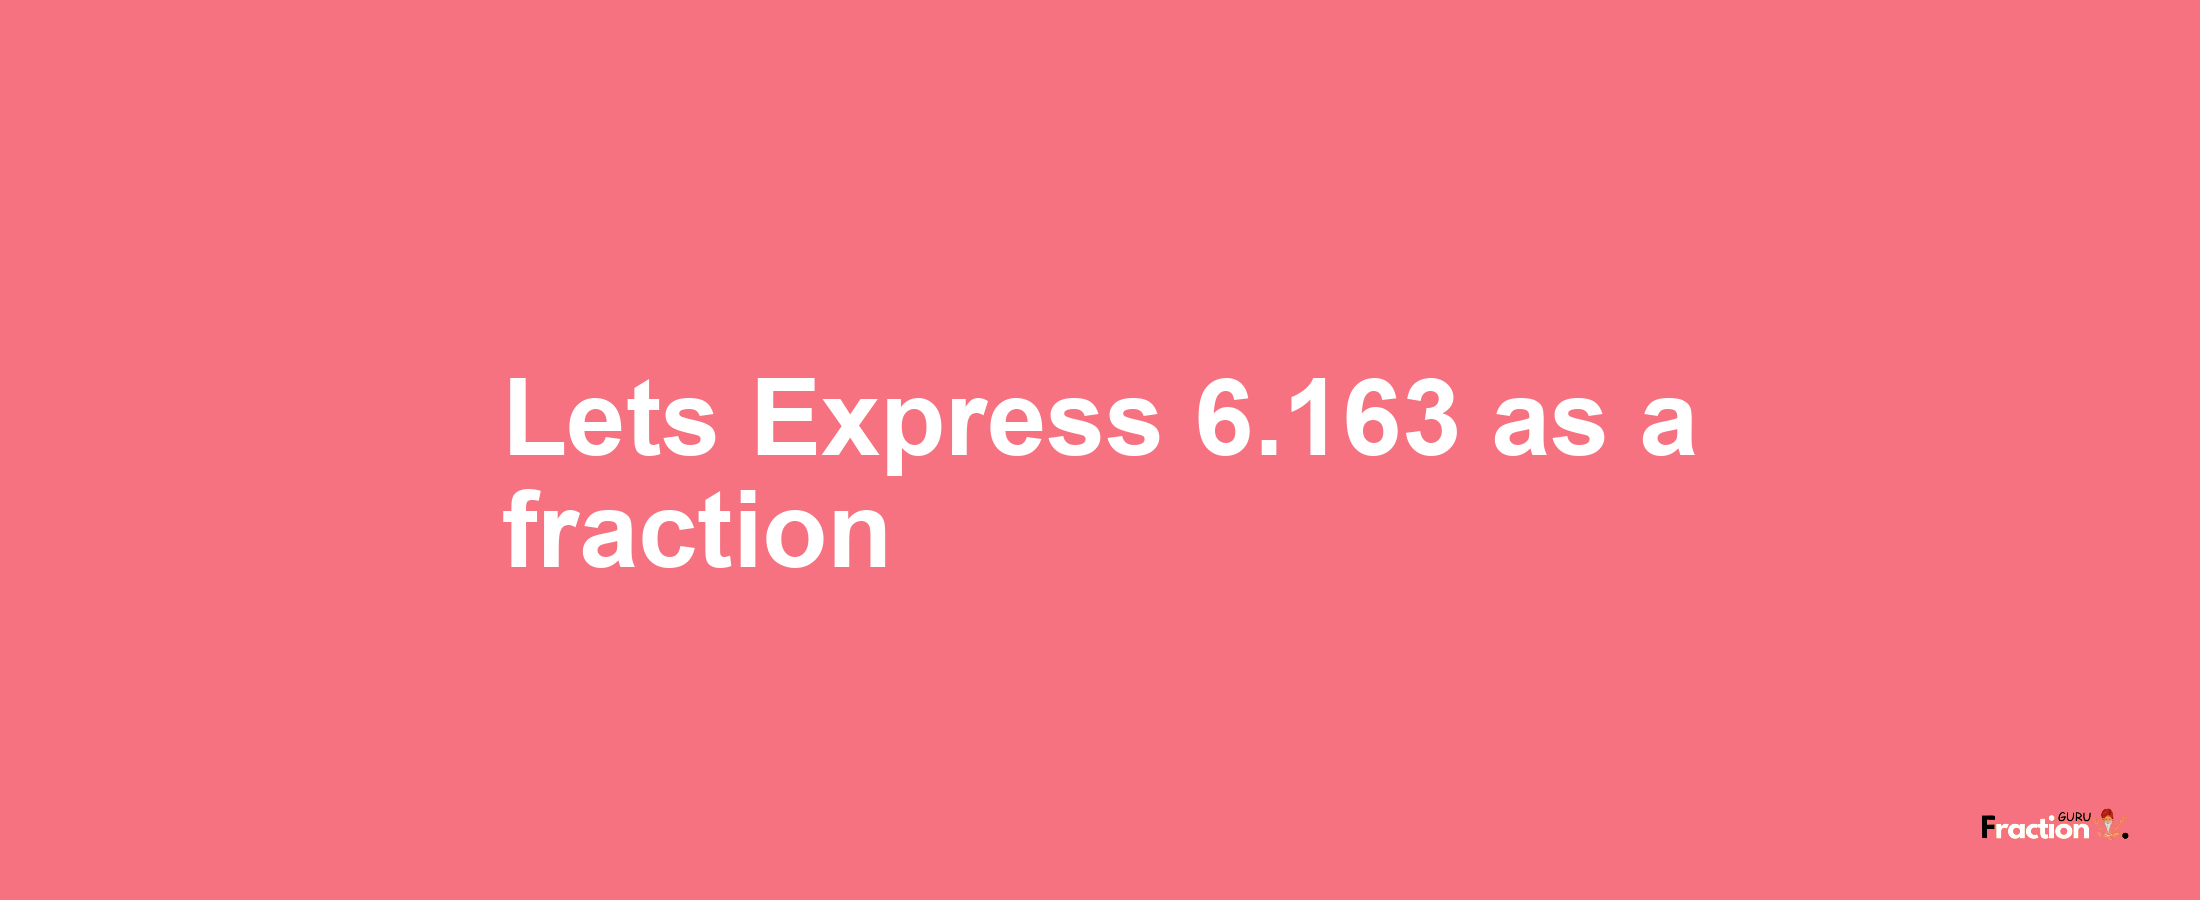 Lets Express 6.163 as afraction